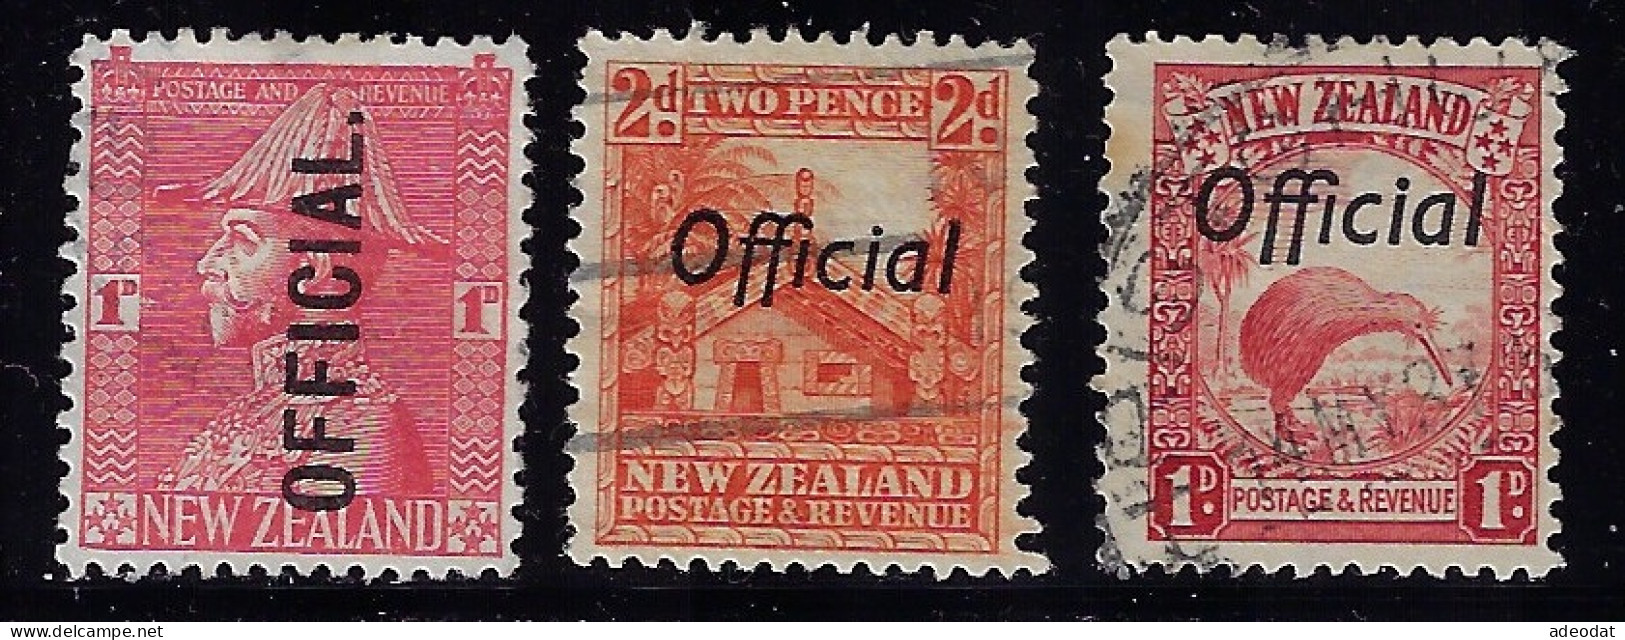 NEW ZEALAND 1936 0FFICIAL STAMPS  SCOTT #O55,O58,O64 USED - Service